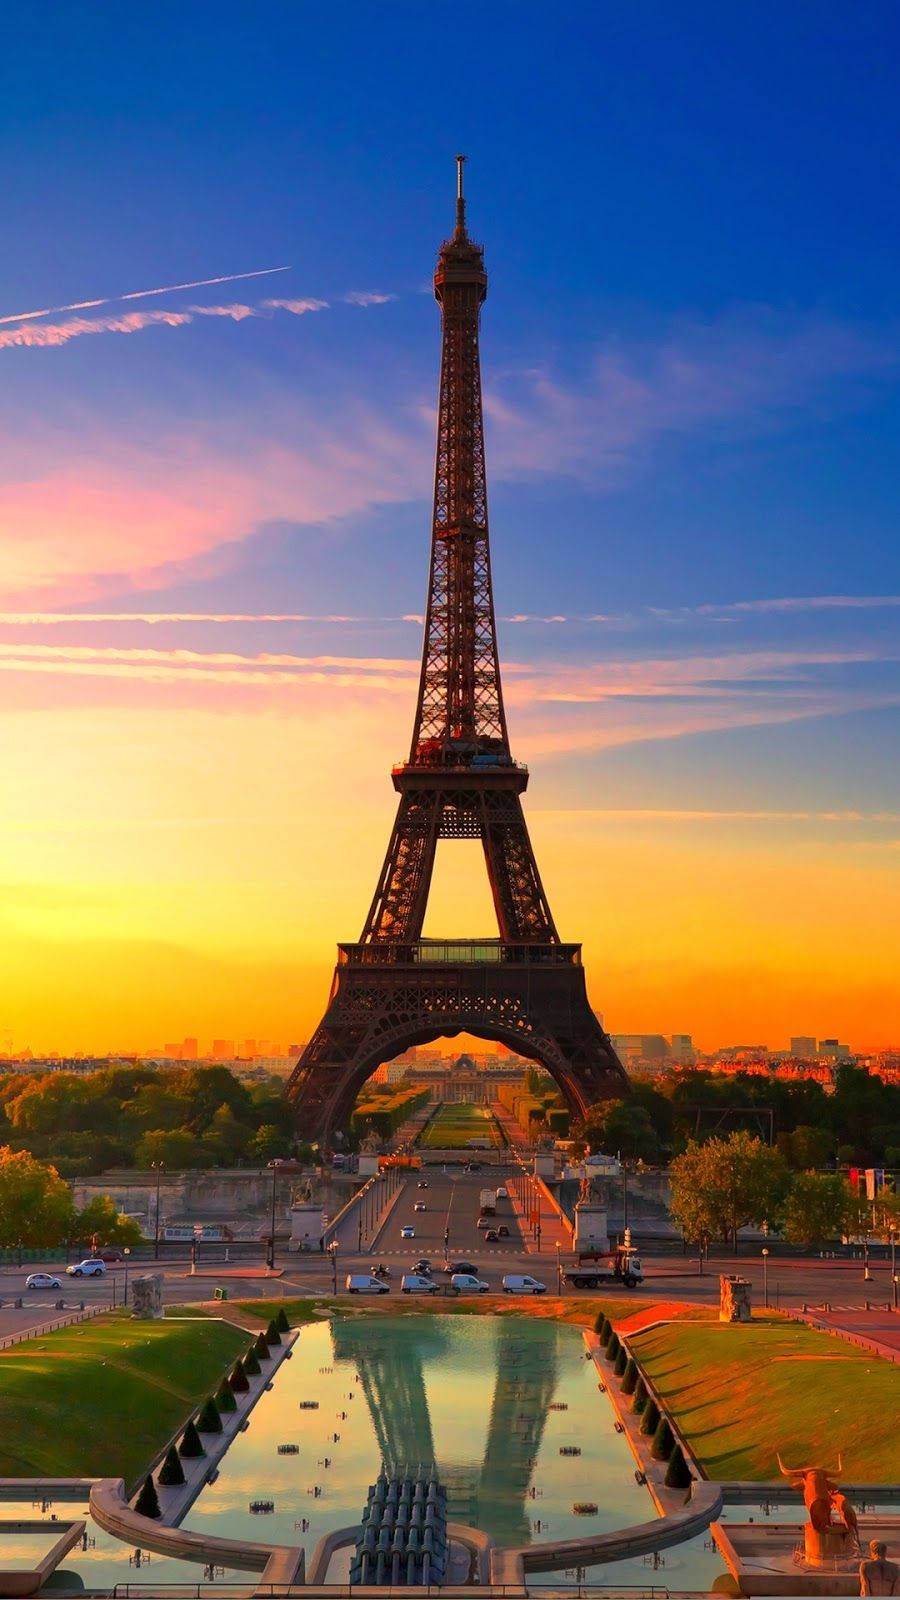 HD wallpaper of Eiffel Tower at Paris during sunset. 